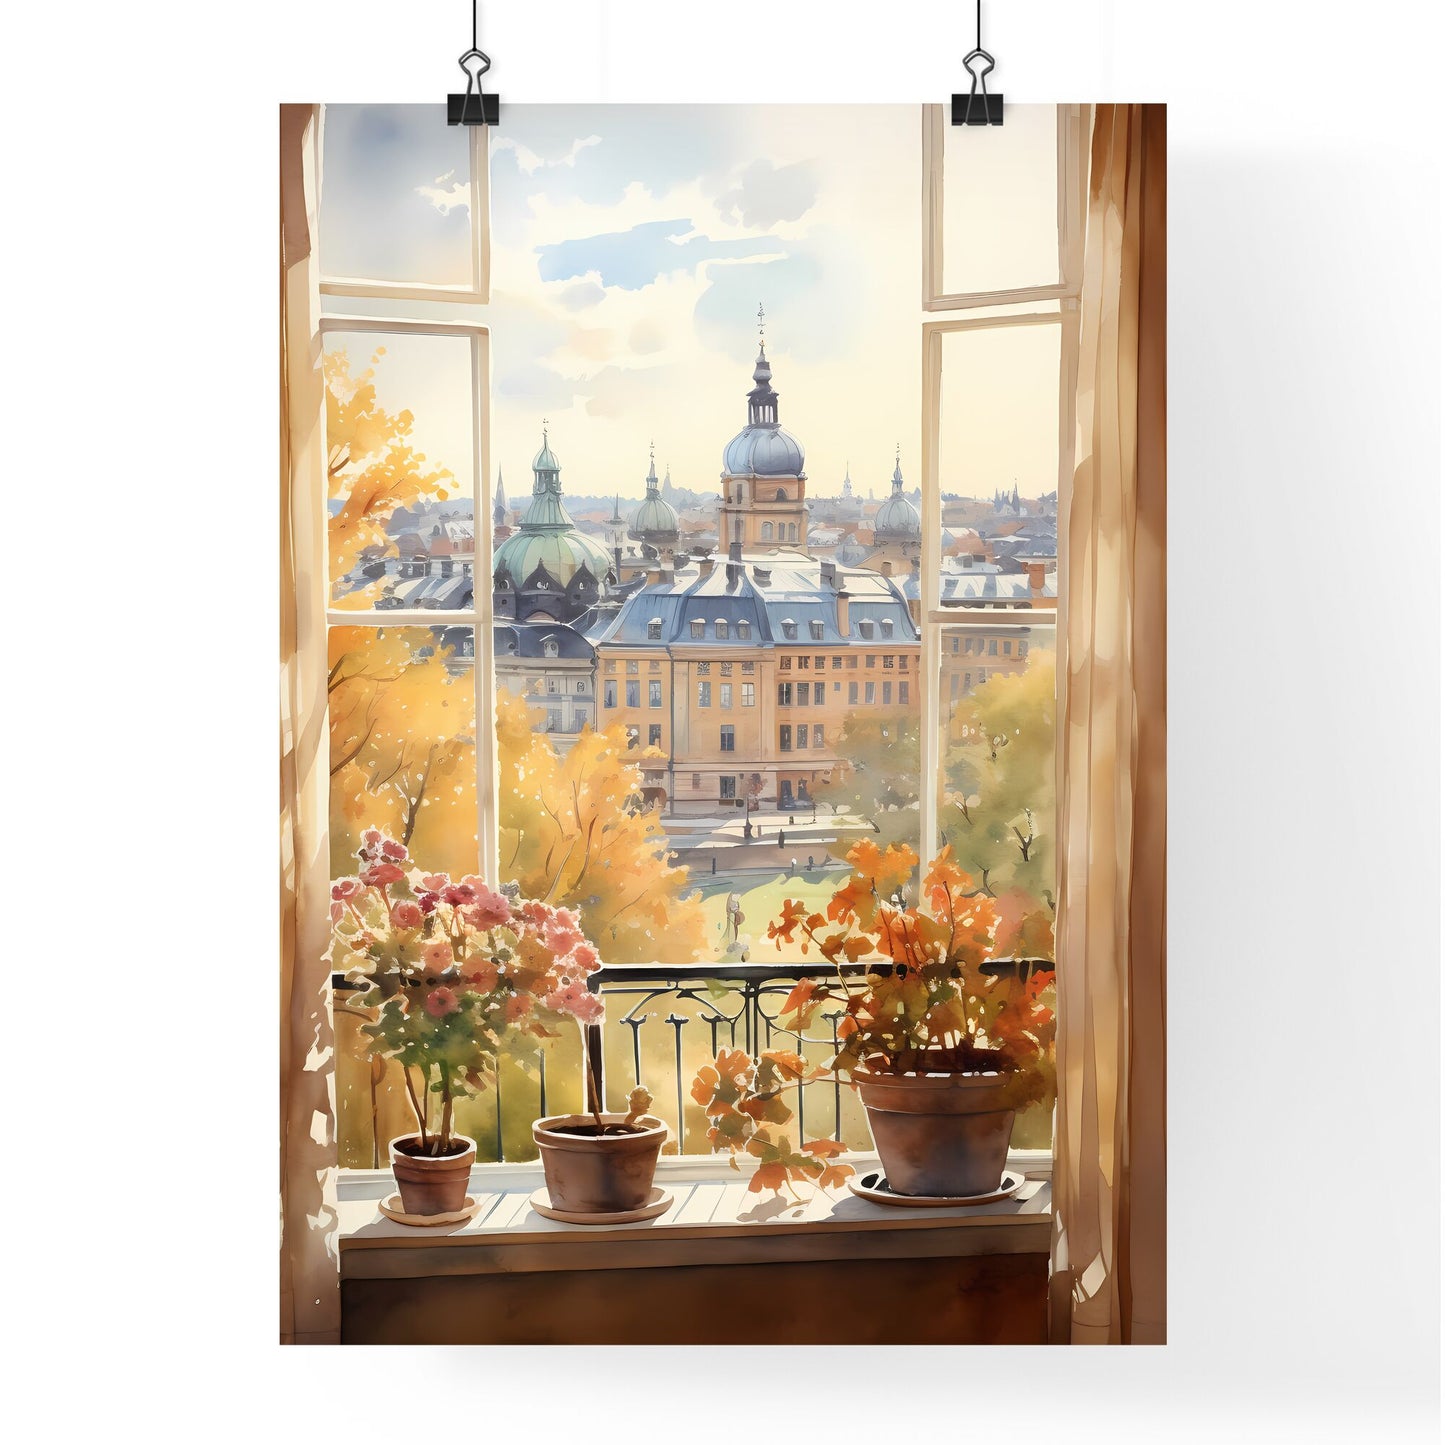 Watercolor Painting Of A Window With A View Of A City And Trees Art Print Default Title